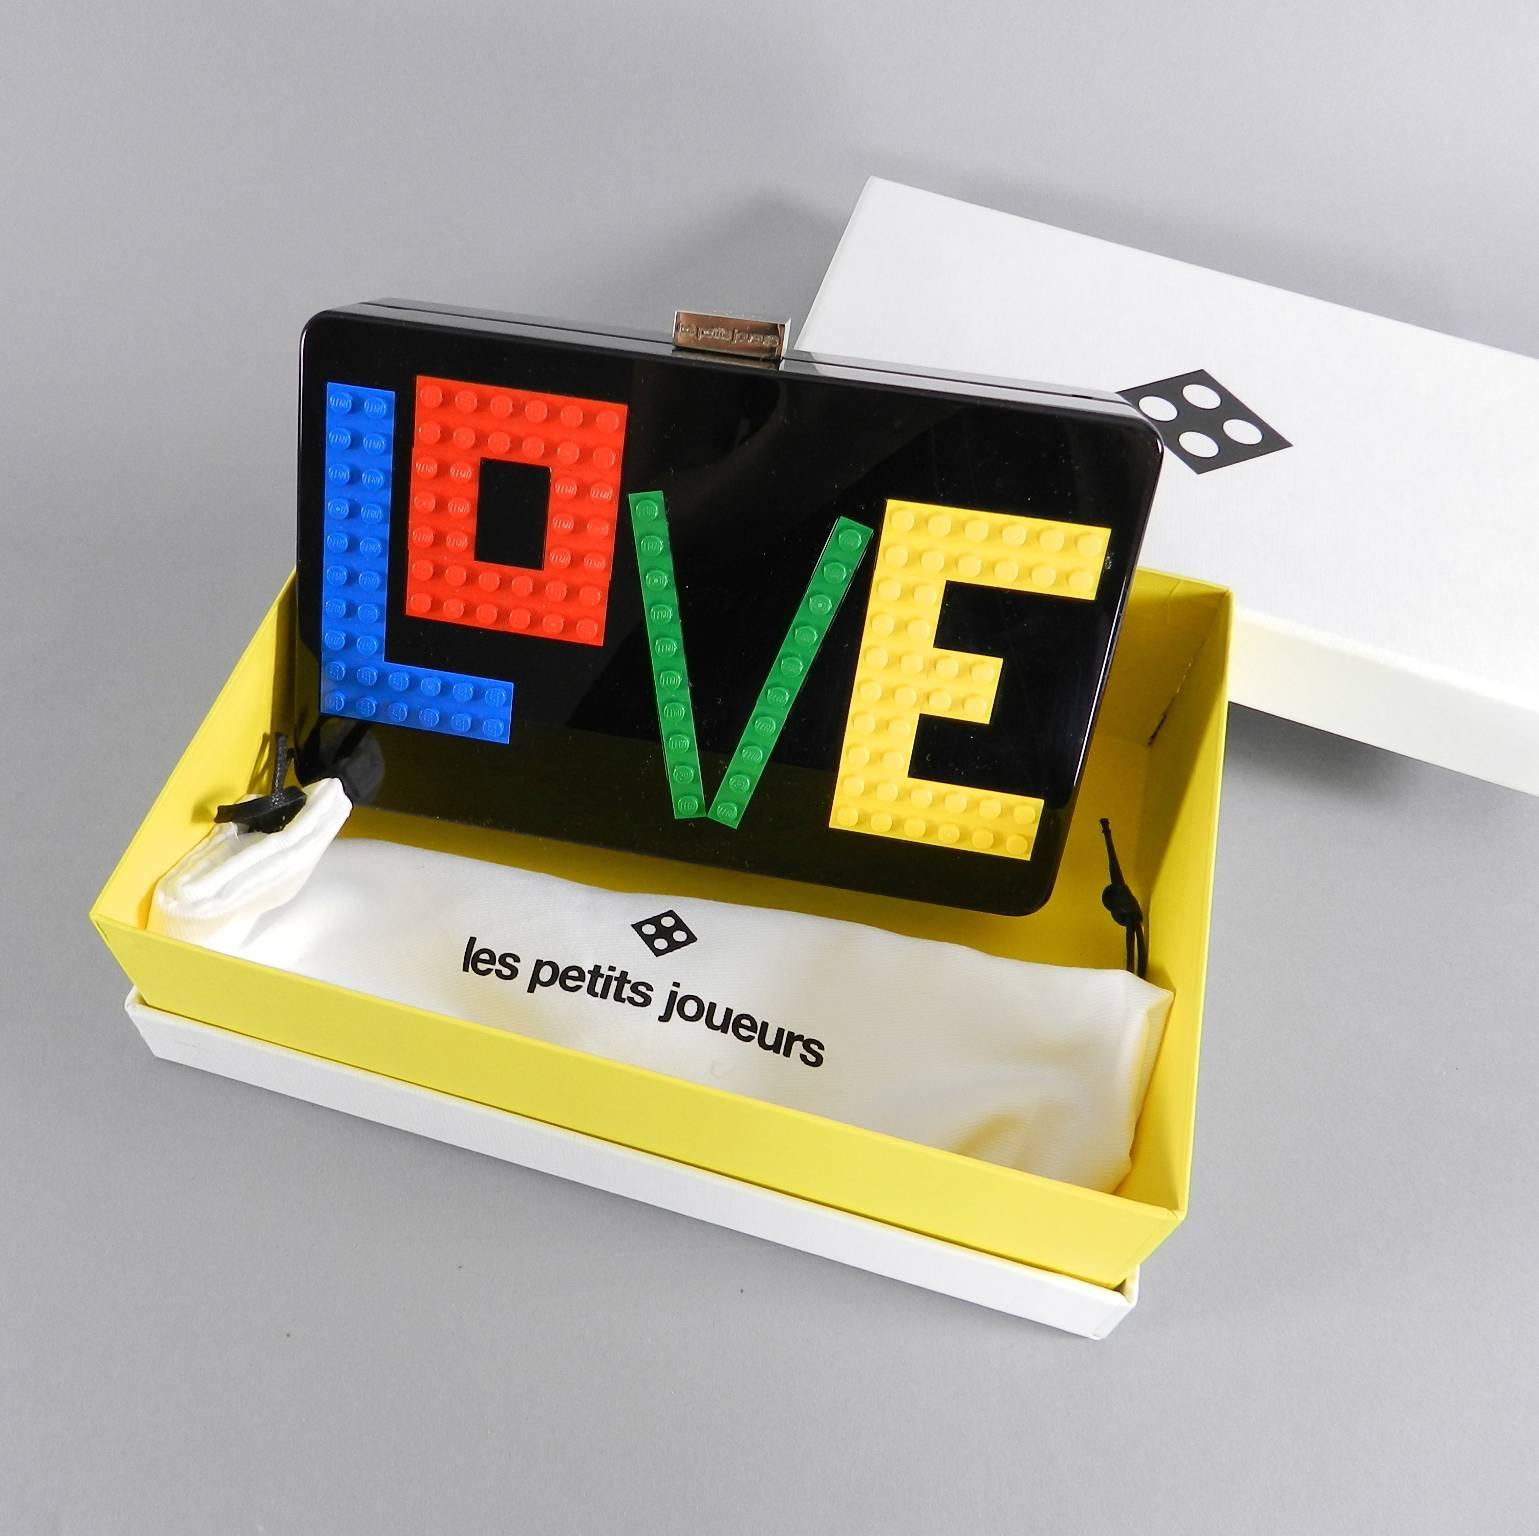 Les Petit Joueurs Andy rainbow love clutch. Black acrylic plastic body with multicolor LEGO detail.  Unused with original purchase receipt, box and papers.  Body of bag measures 7.5 x 4.5 x 1.75